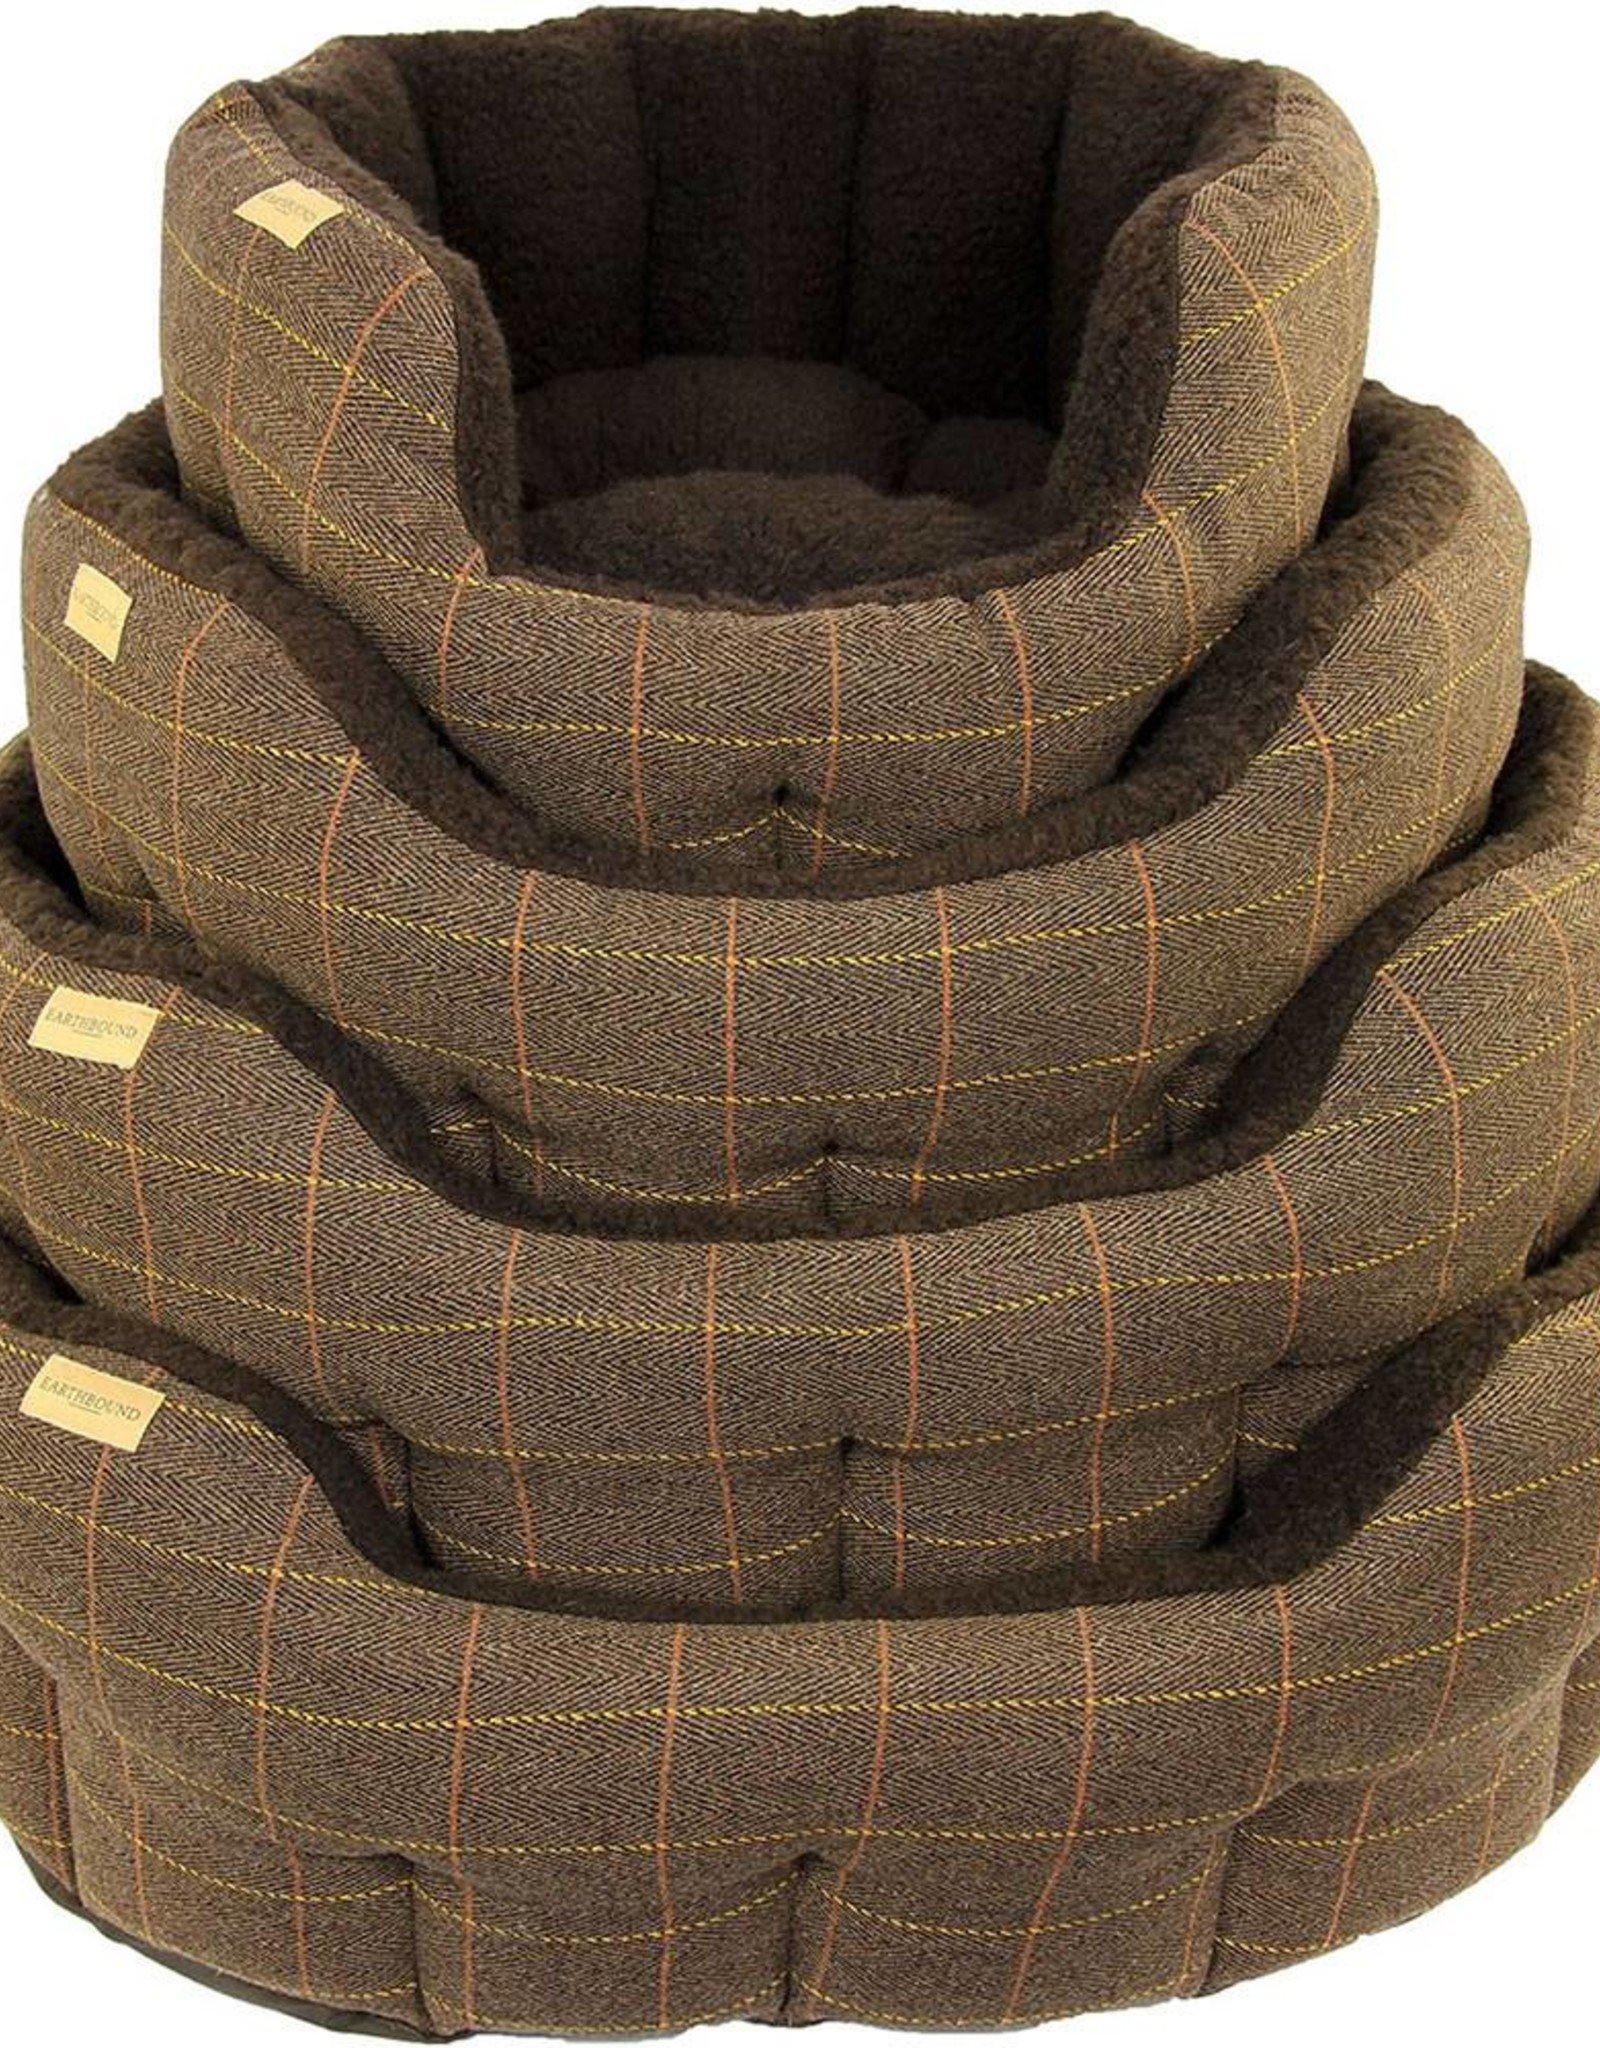 Traditional Tweed Bed, Brown - Pet Care 